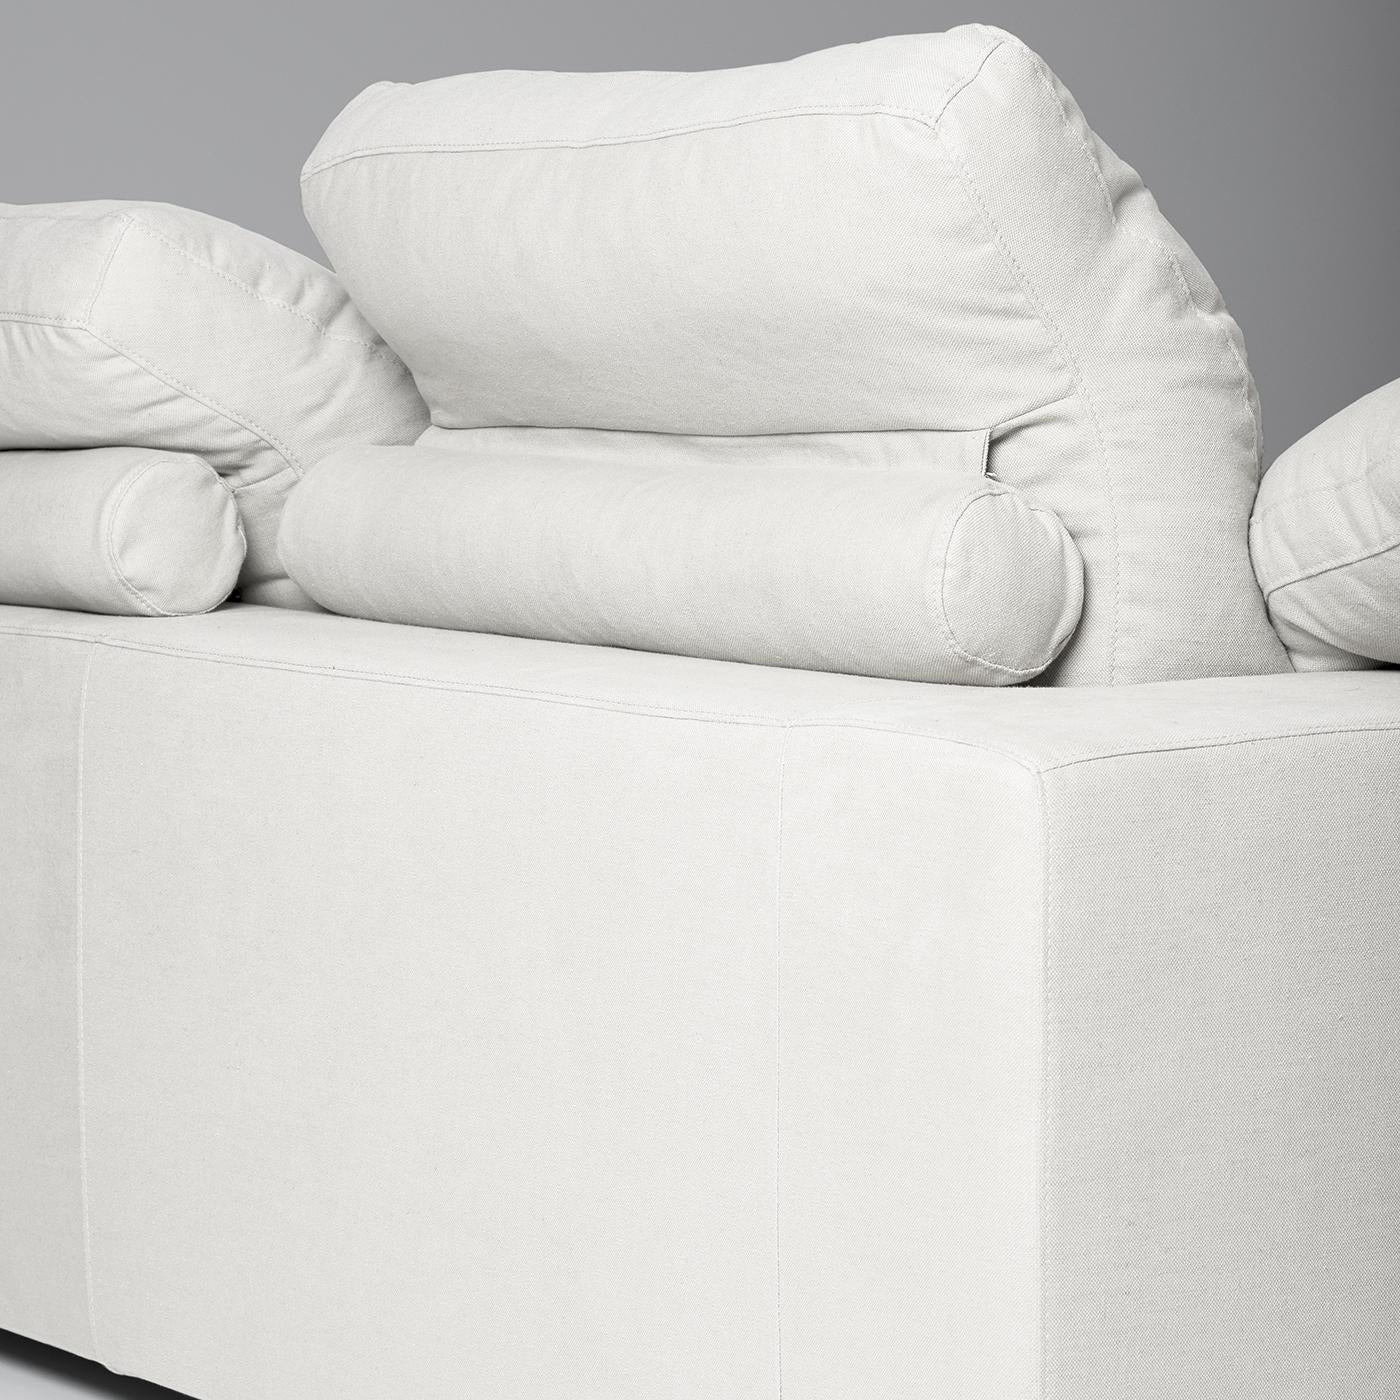 This bright, contemporary white fabric sofa from the Tribeca collection will add light and elegance to any home space. A three-seat sofa with plush seat cushions in polyurethane foam and goose down, square armrests, and three backrest cushions, this